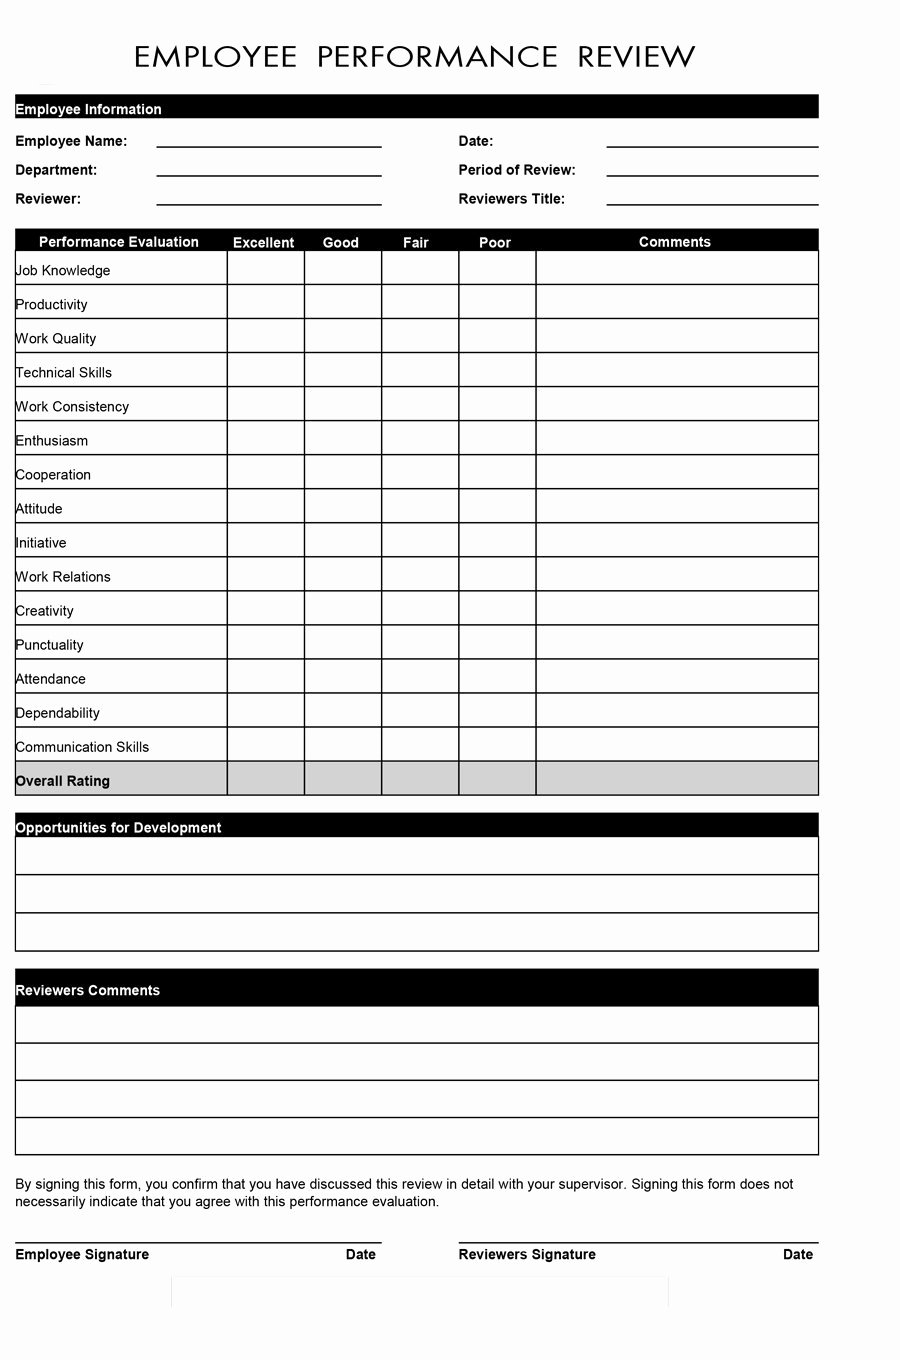 Employee Evaluation form Template Unique 46 Employee Evaluation forms &amp; Performance Review Examples